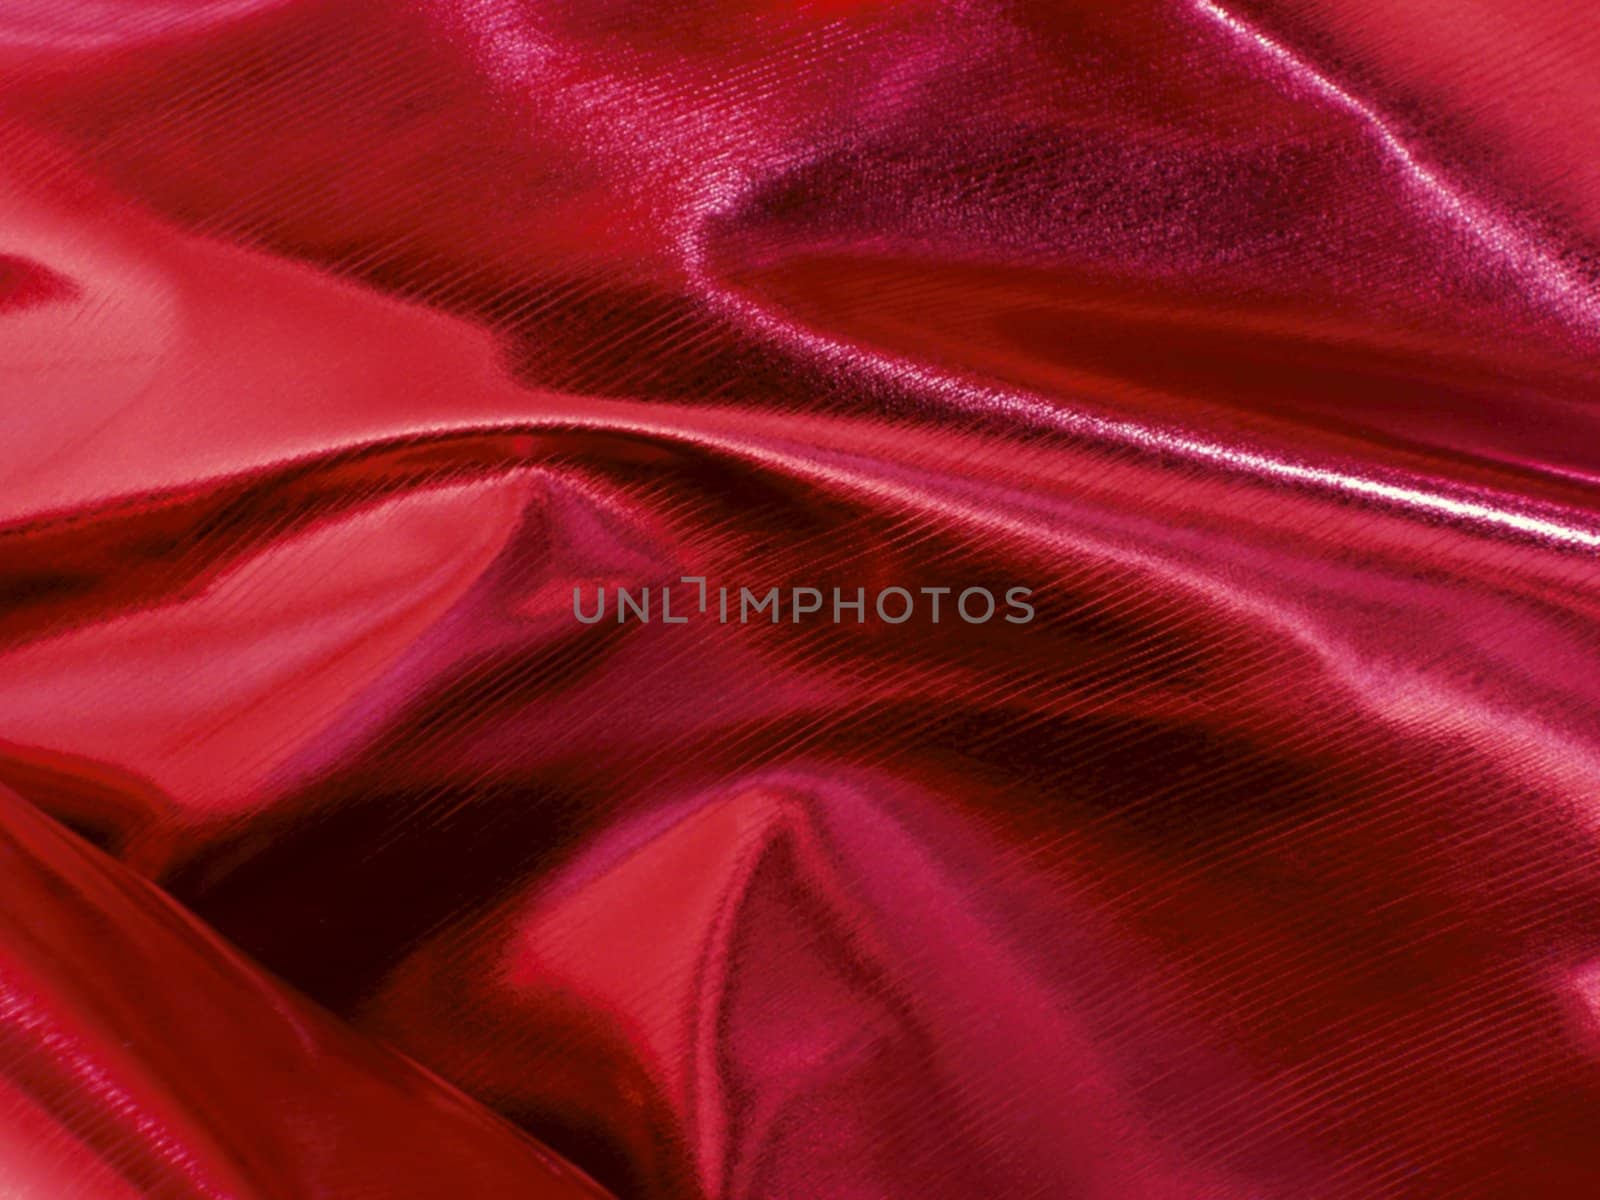 An exclusive background of dark shiny warm red decoration fabric with a metallic surface.